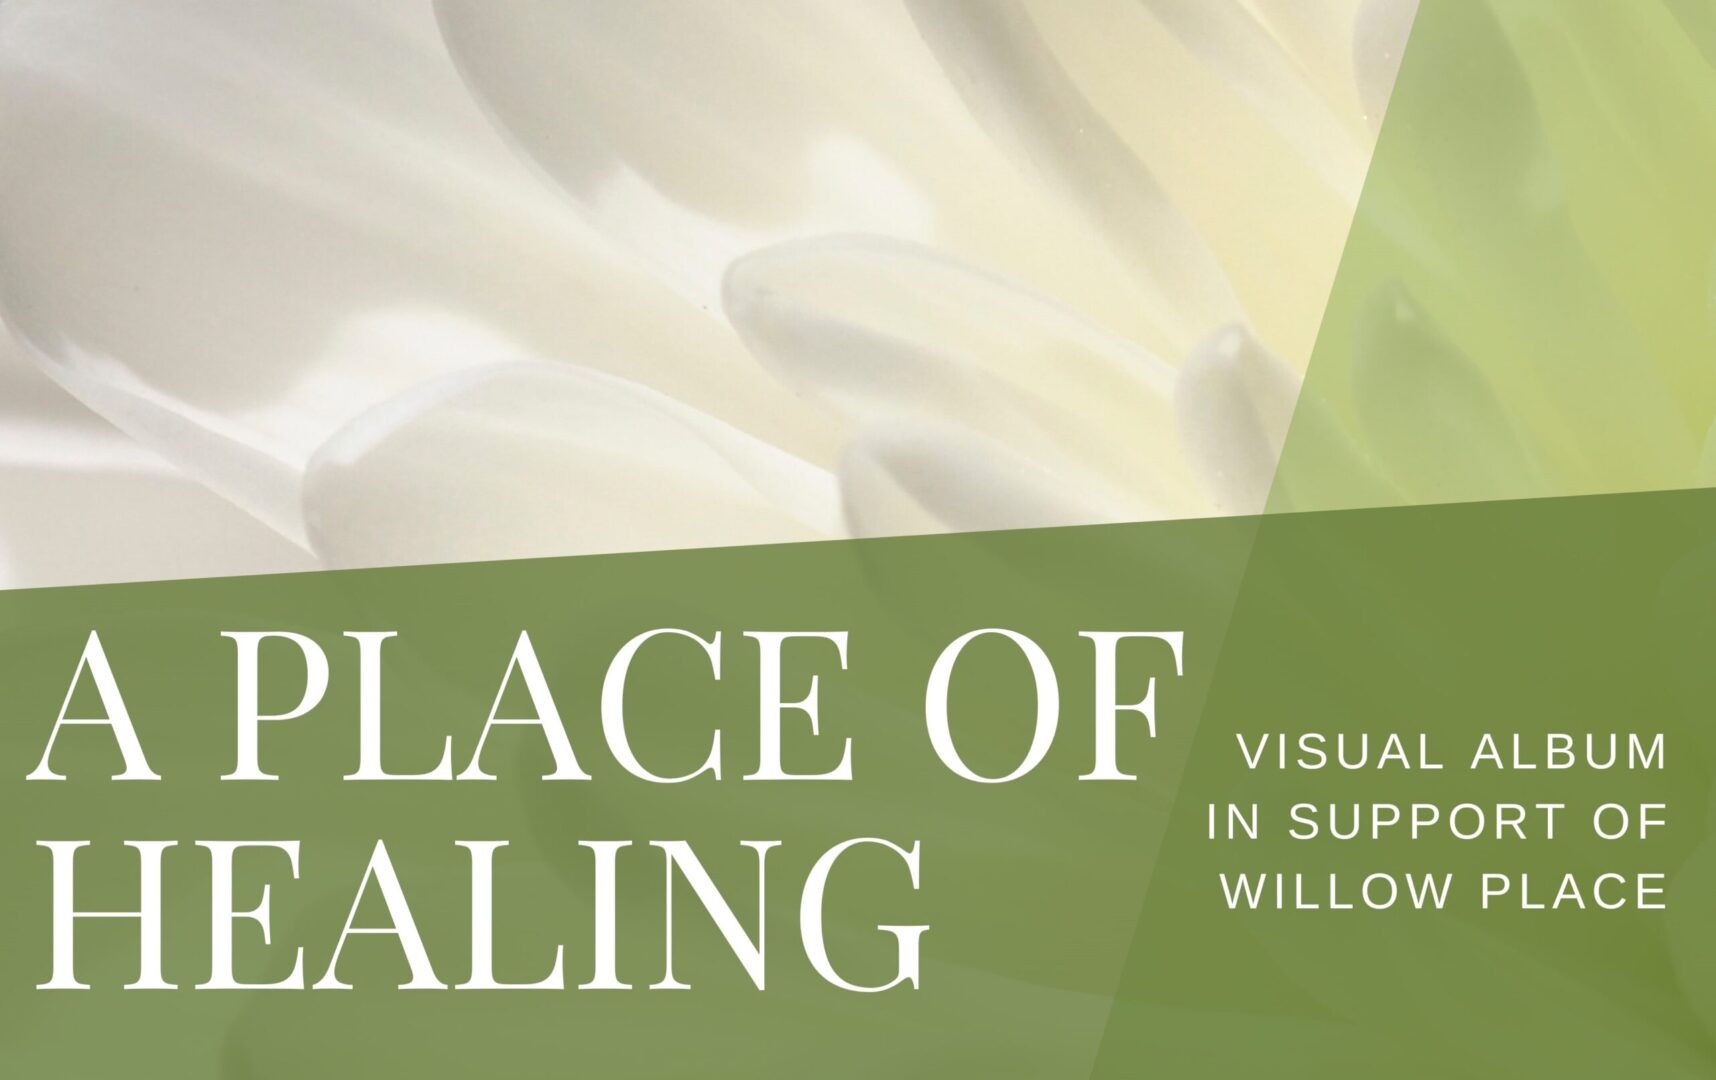 A place of healing : visual arts in support of willow